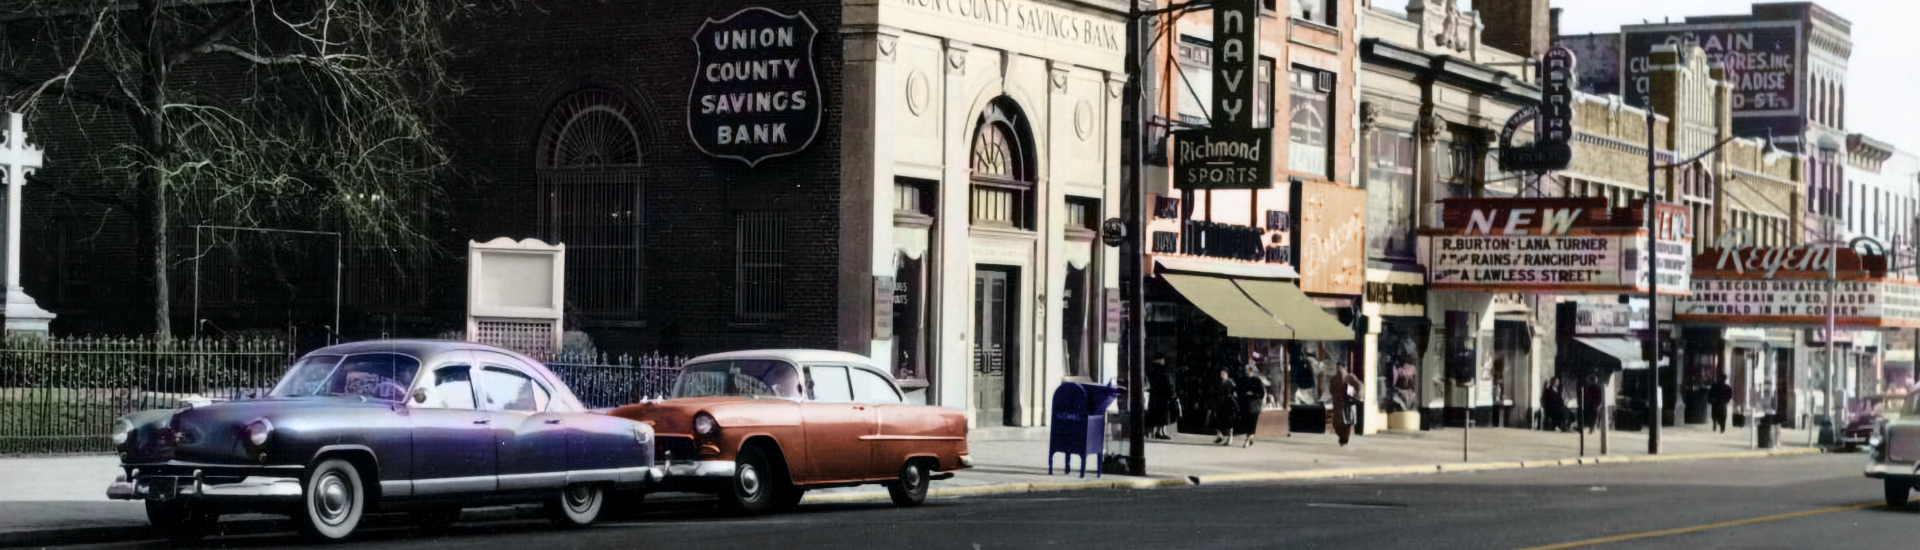 Old picture of Union County Savings Bank